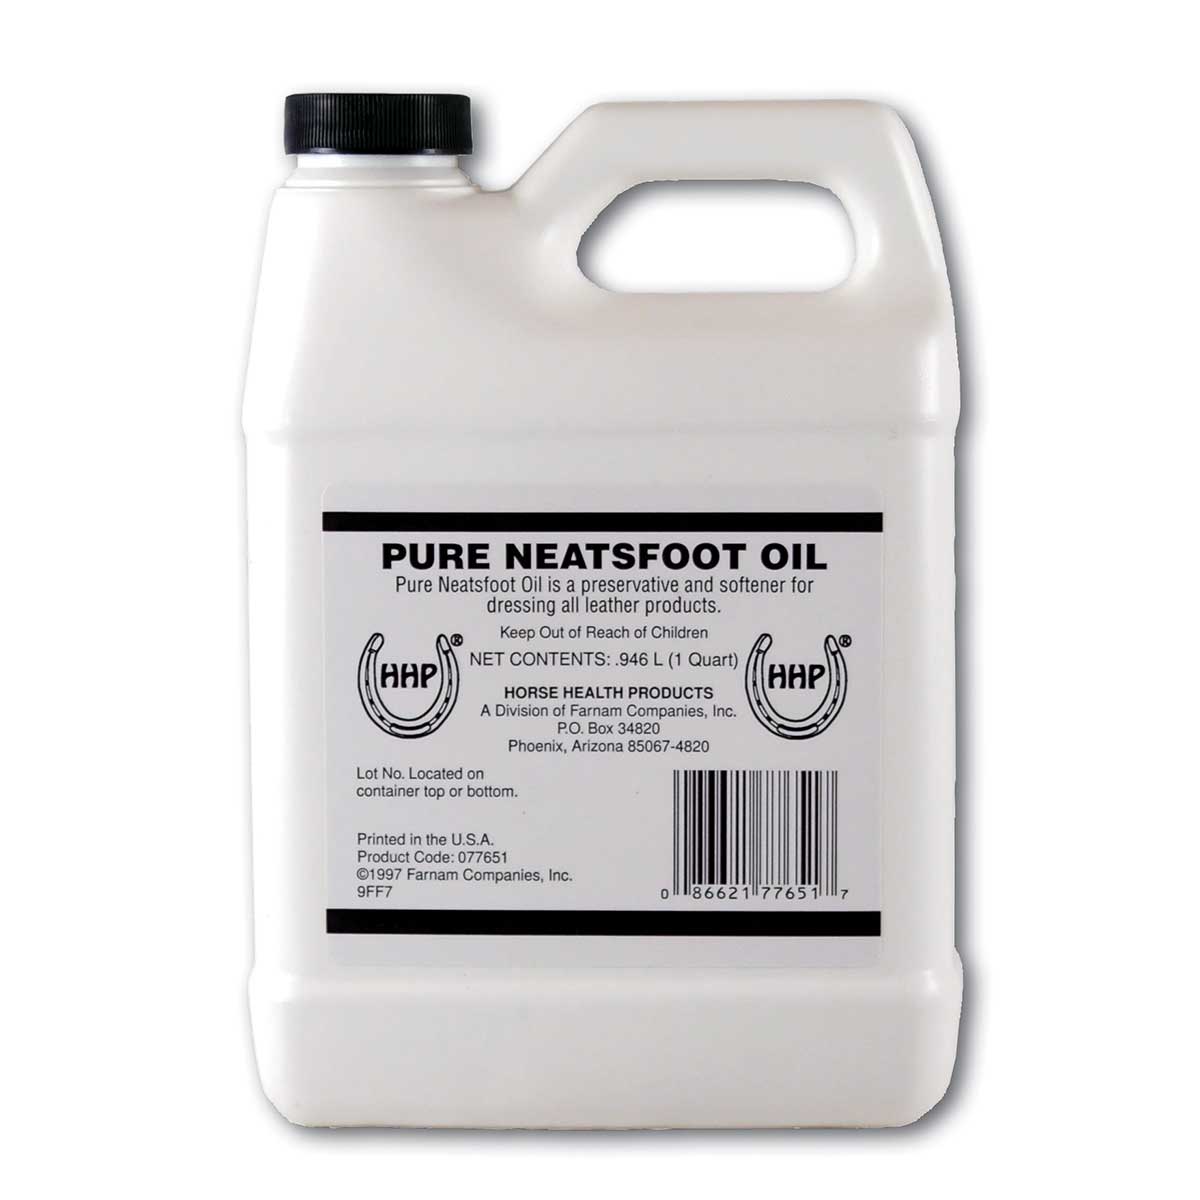 Pure Neats foot oil